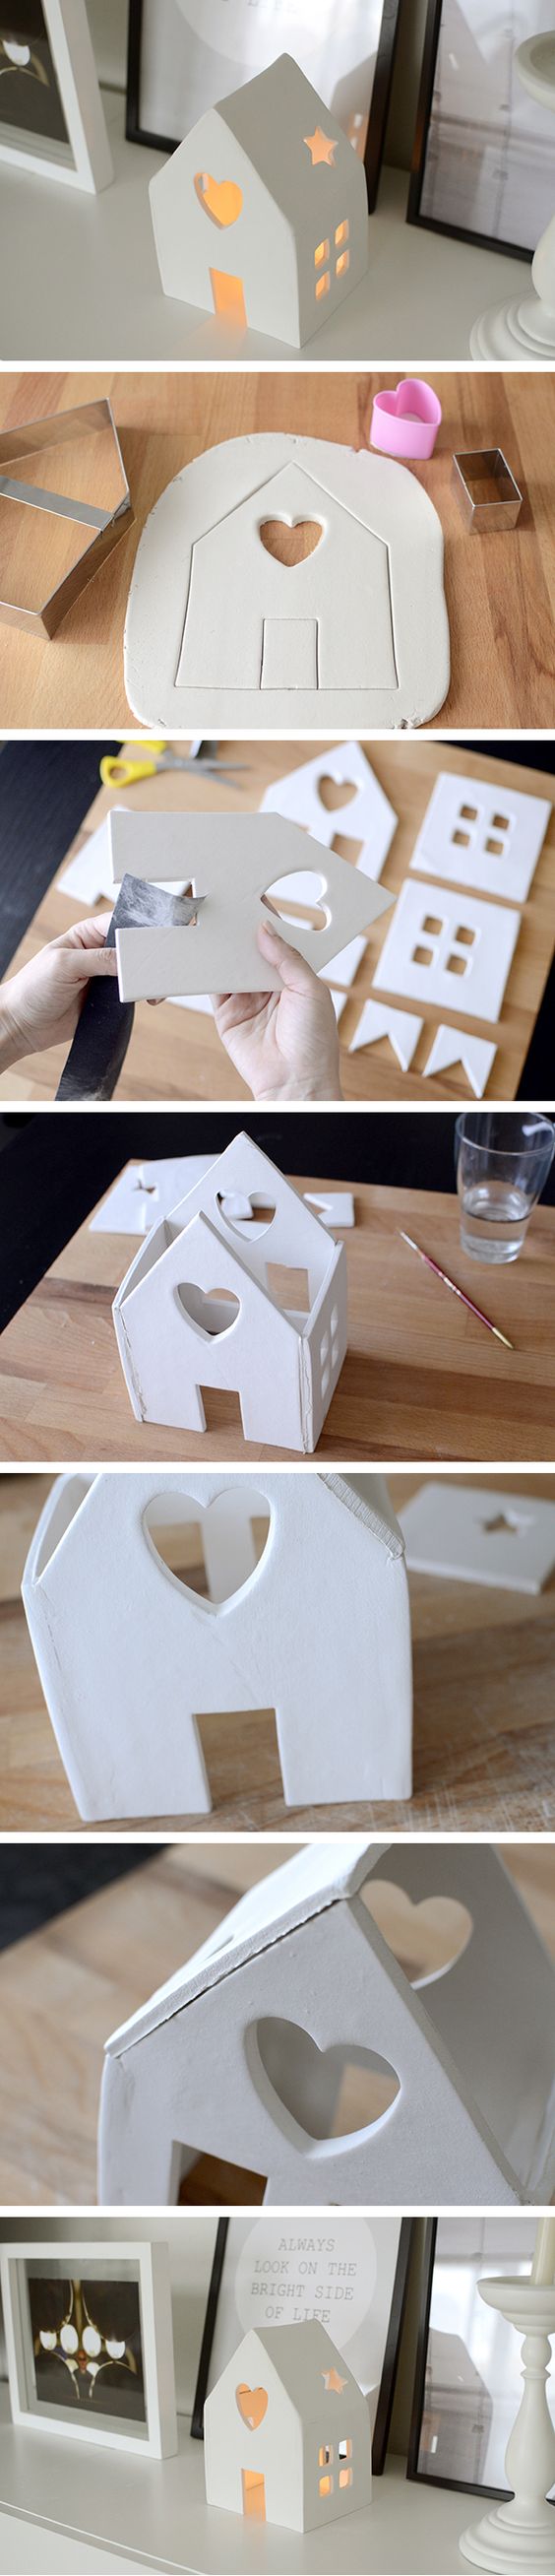 DIY House Candle Holder With Air Dry Clay. 